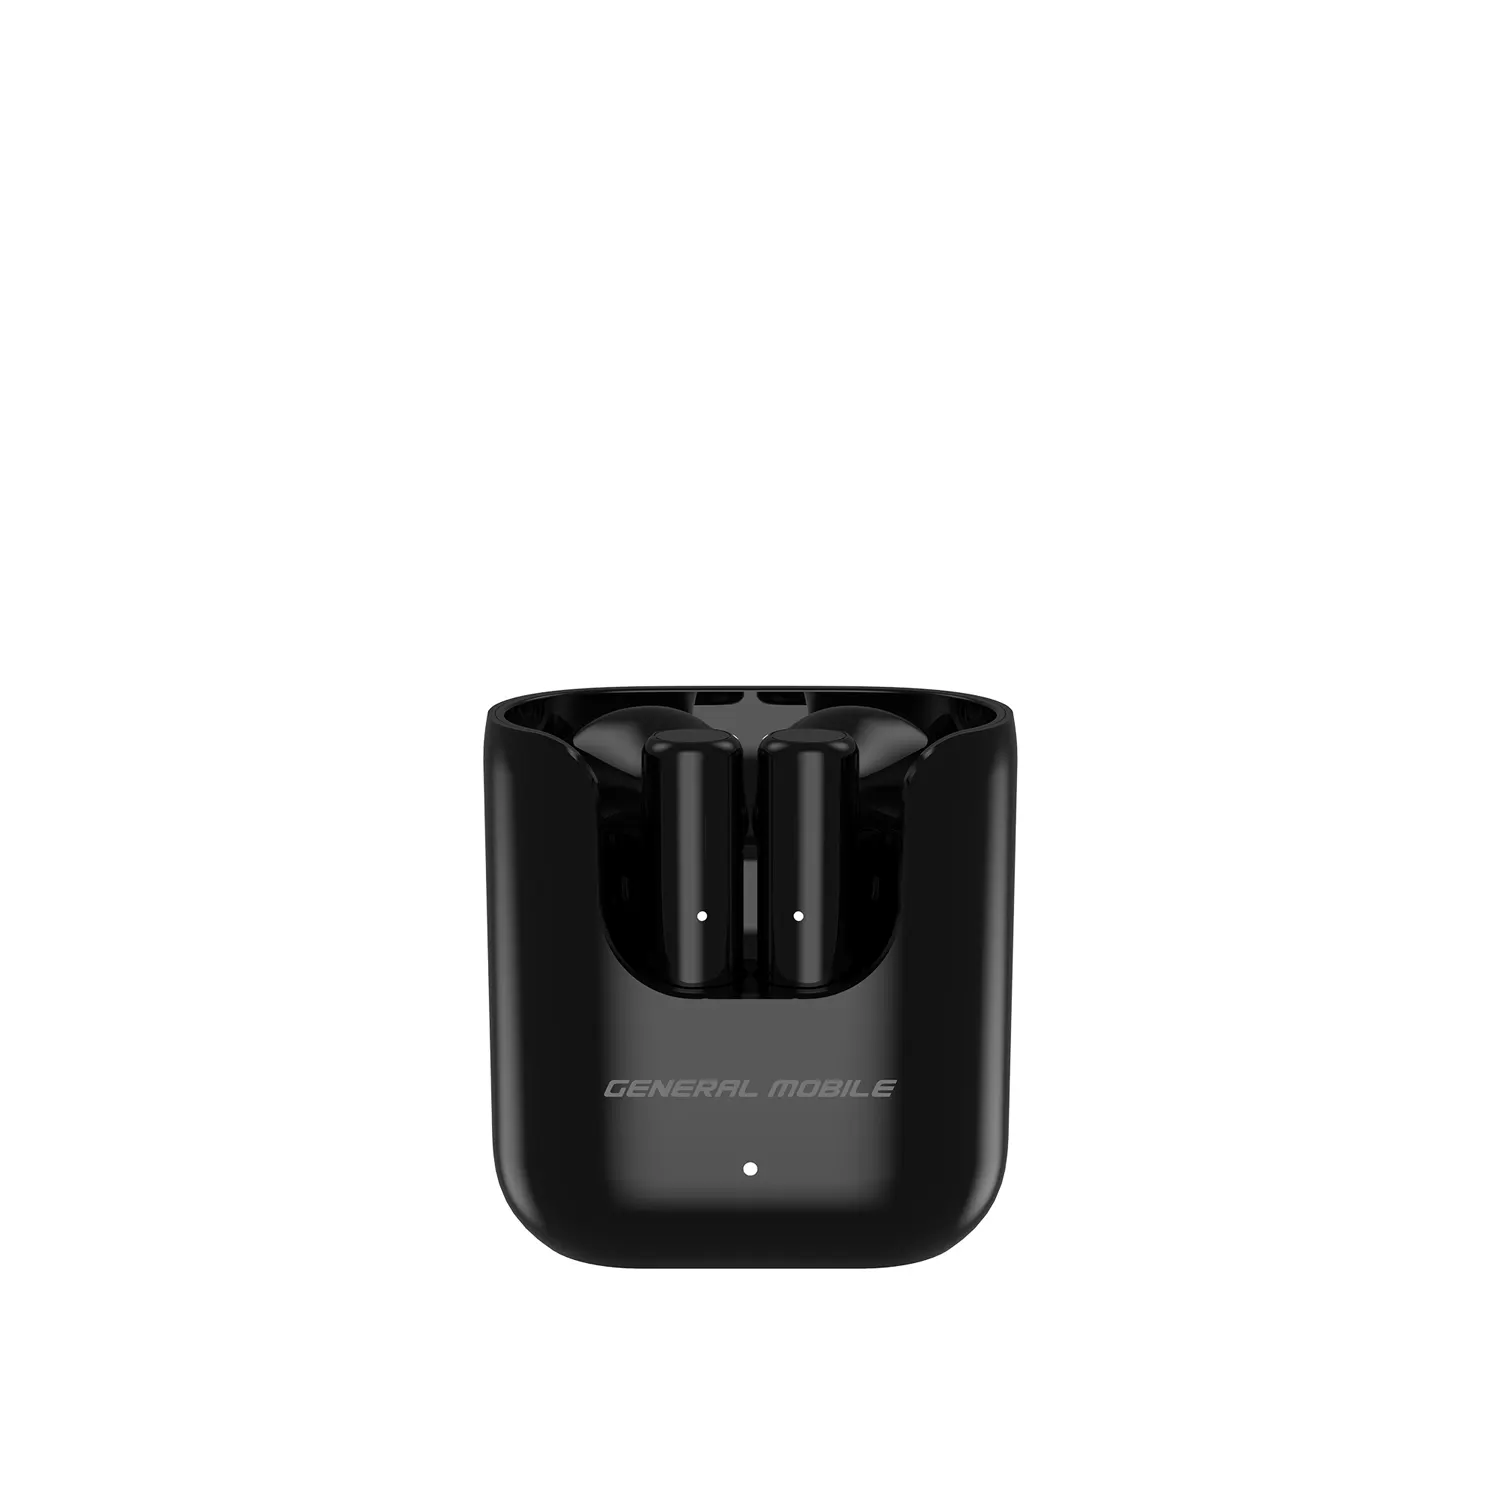 General Mobile Gmpods 2 Pro True Wireless Earbuds, AAC HD Audio Codec,Noise Cancelling